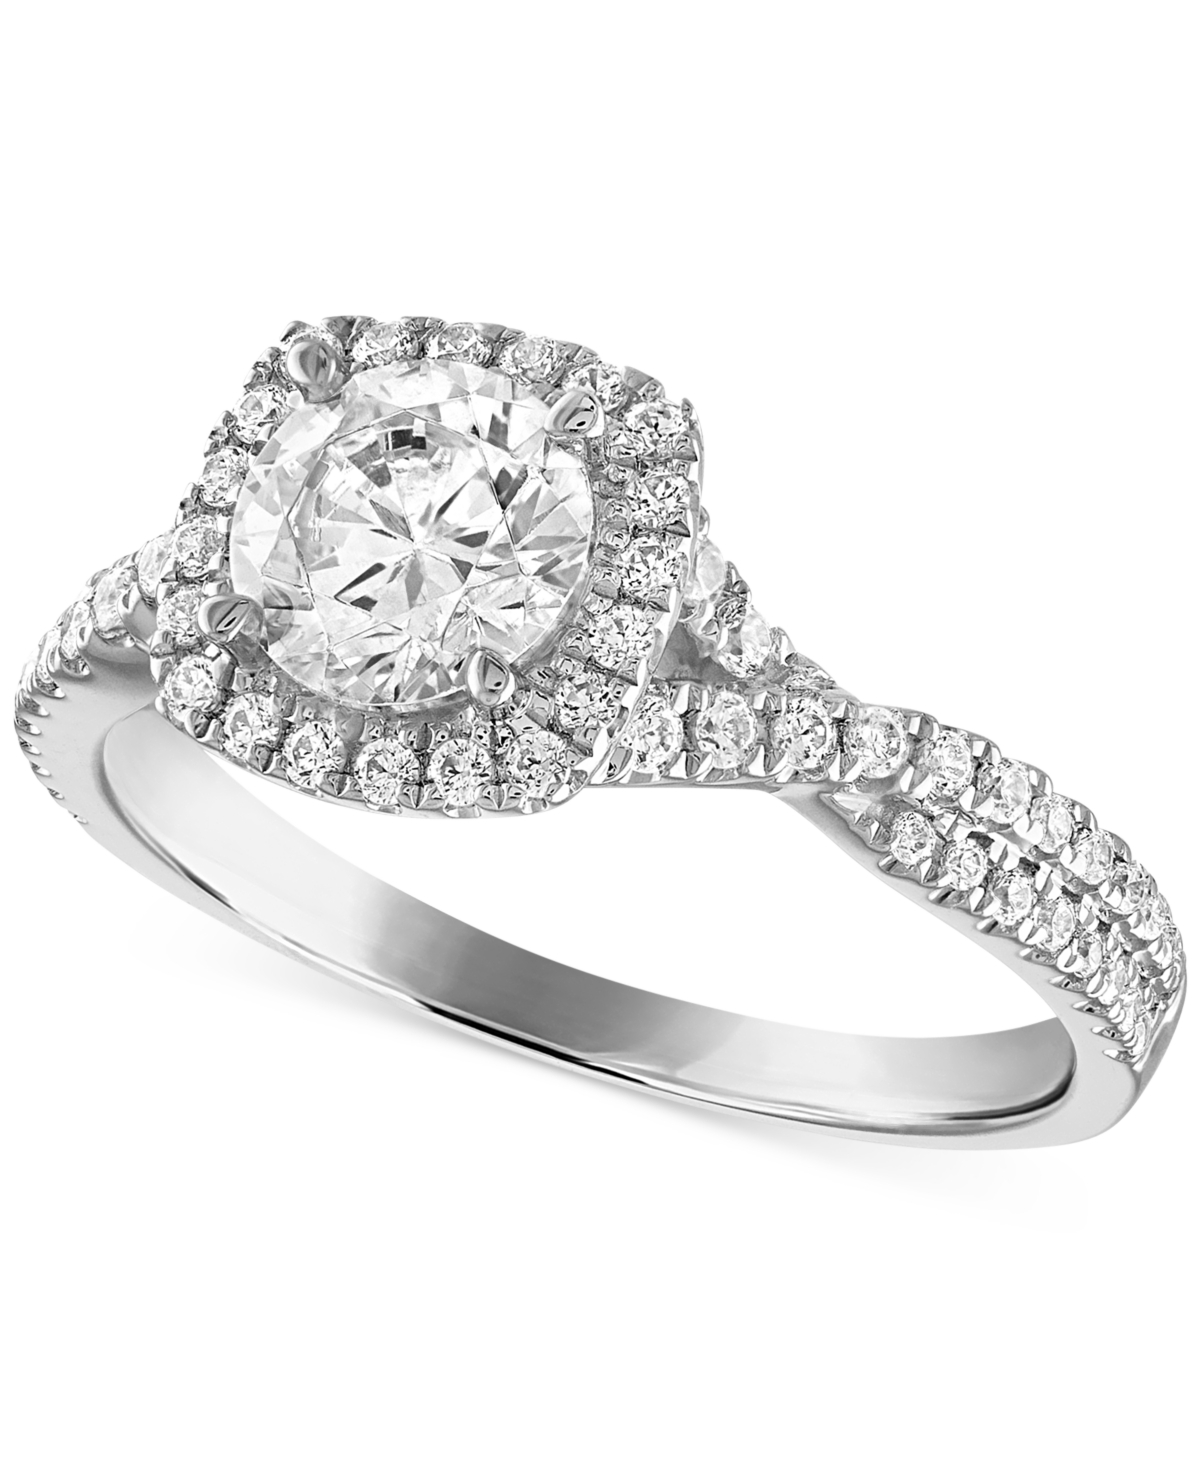 Certified Diamond Halo Engagement Ring (1-1/3 ct. t.w.) in 14k White Gold featuring diamonds with the De Beers Code of Origin, Created for Mac